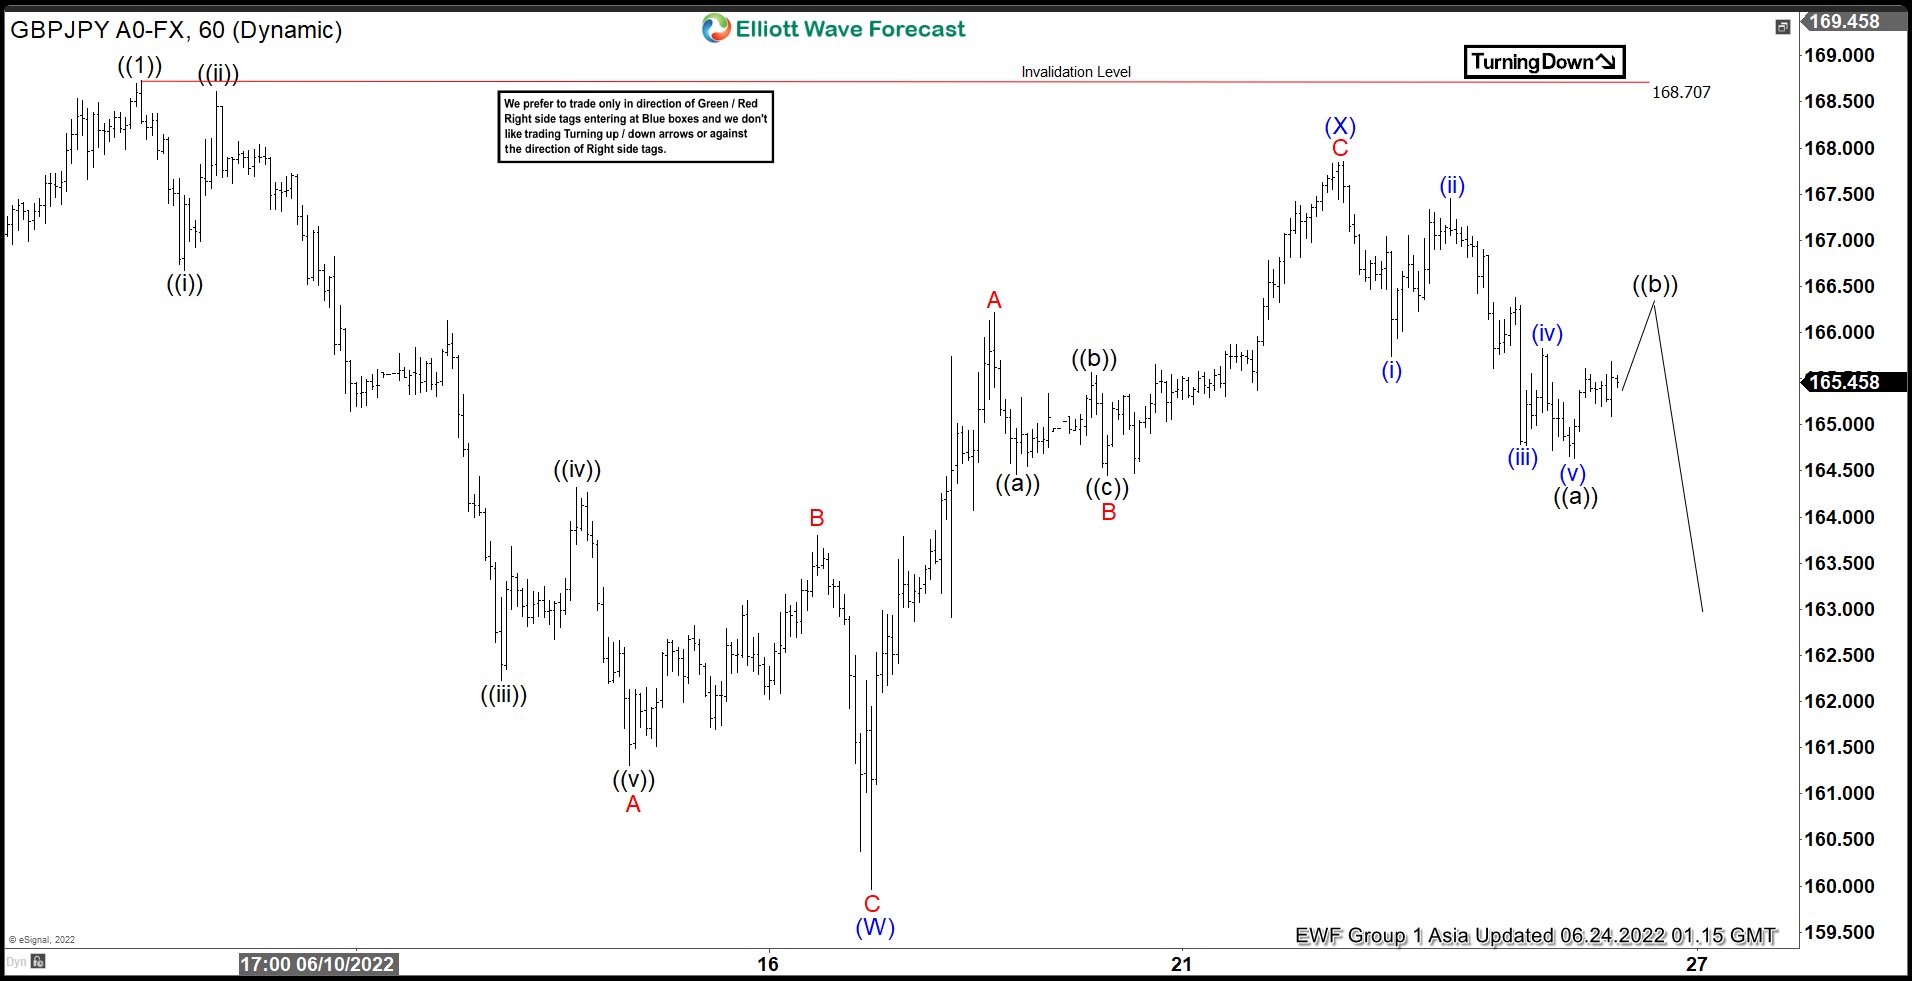 Elliott Wave View: GBPJPY Correction Can Extend